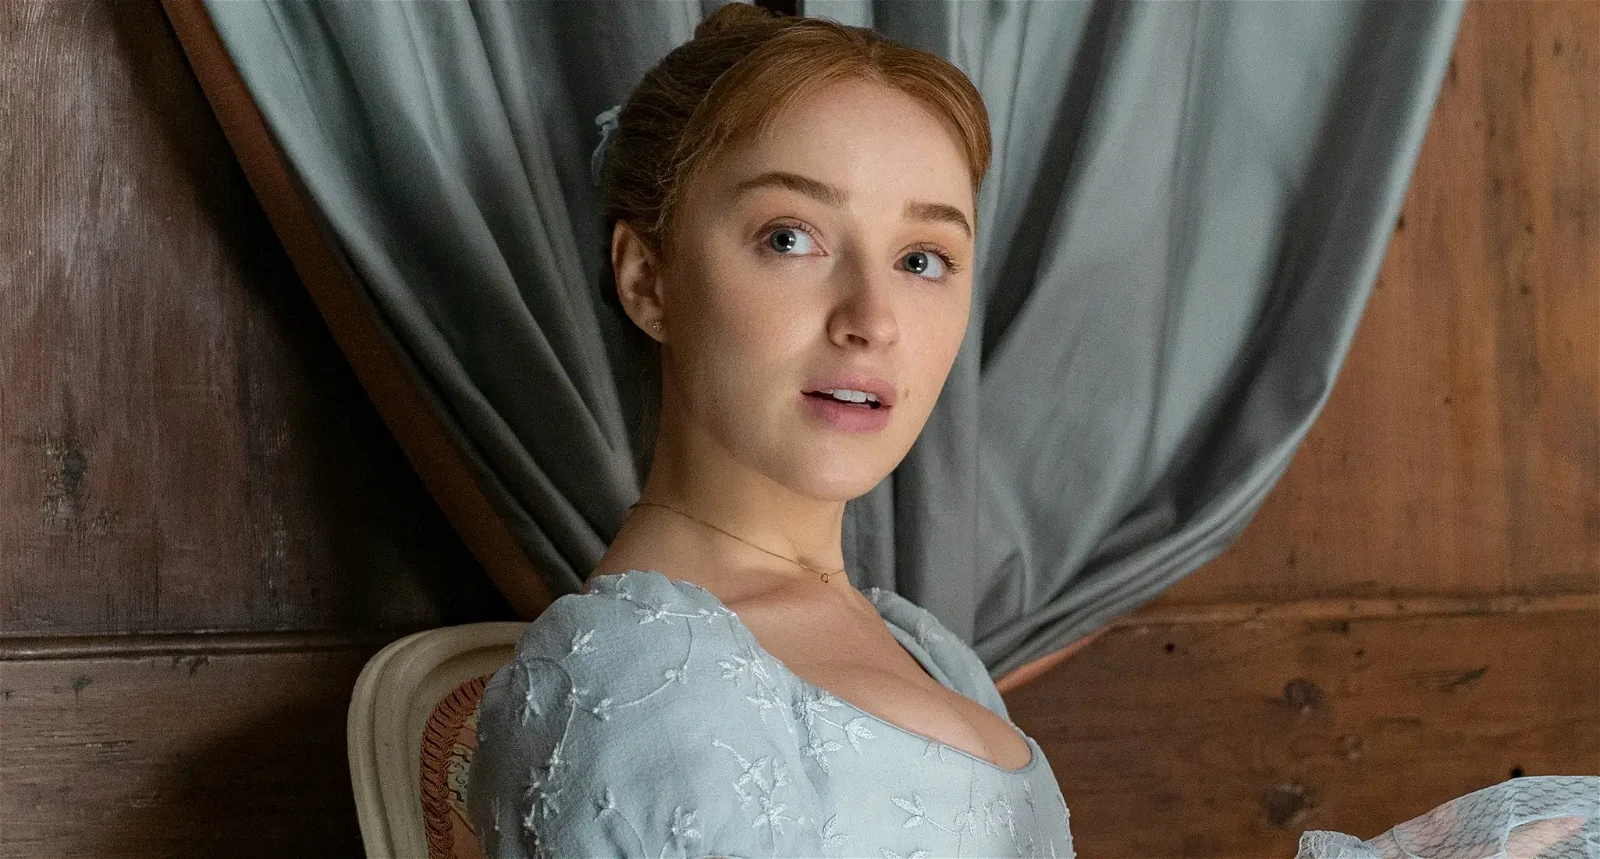 Phoebe Dynevor has also spoken about Hollywood's unfair attitude to women